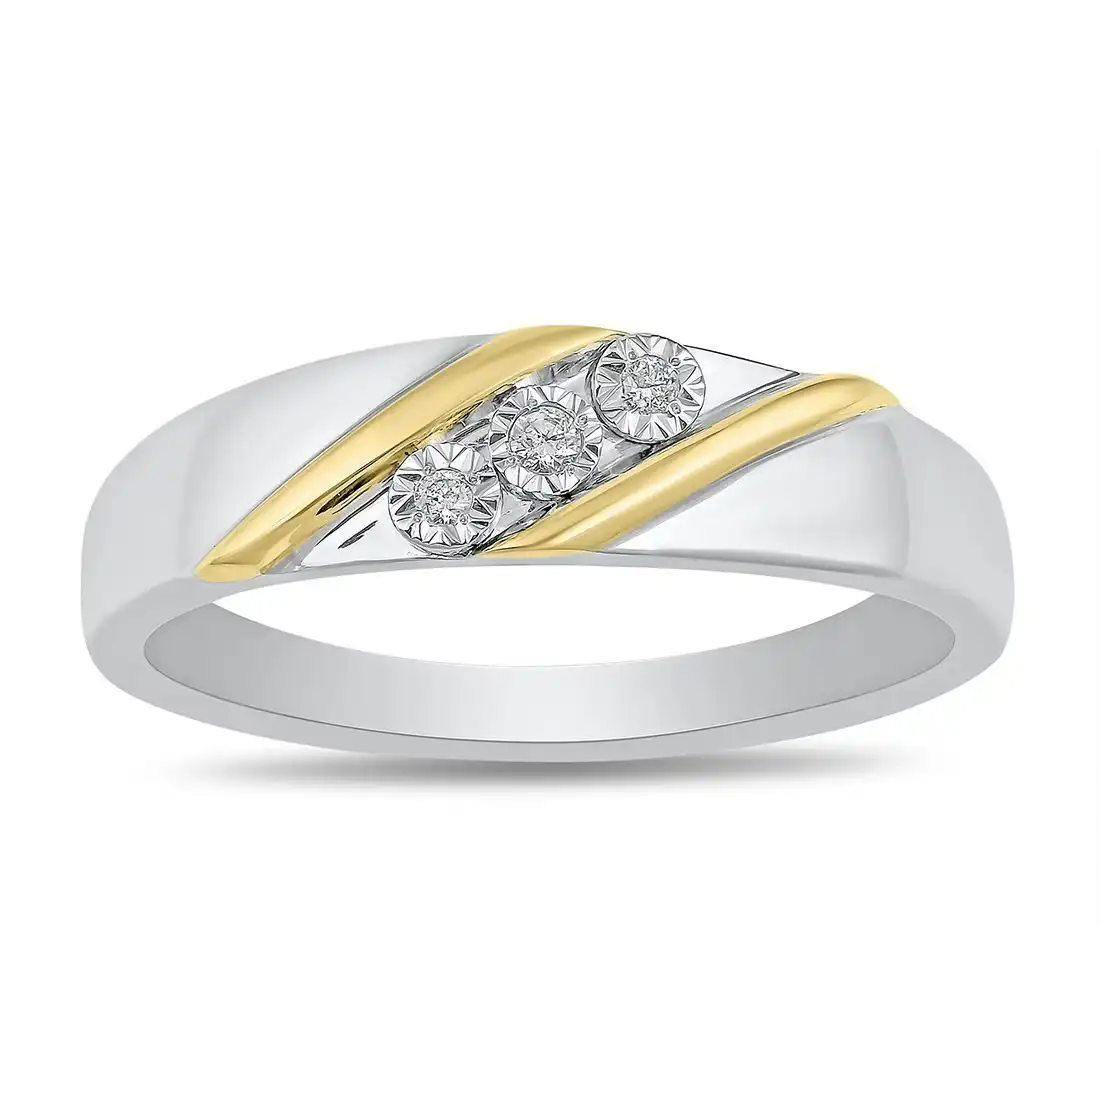 Men's Diamond Ring in Sterling Silver & 9ct Yellow Gold